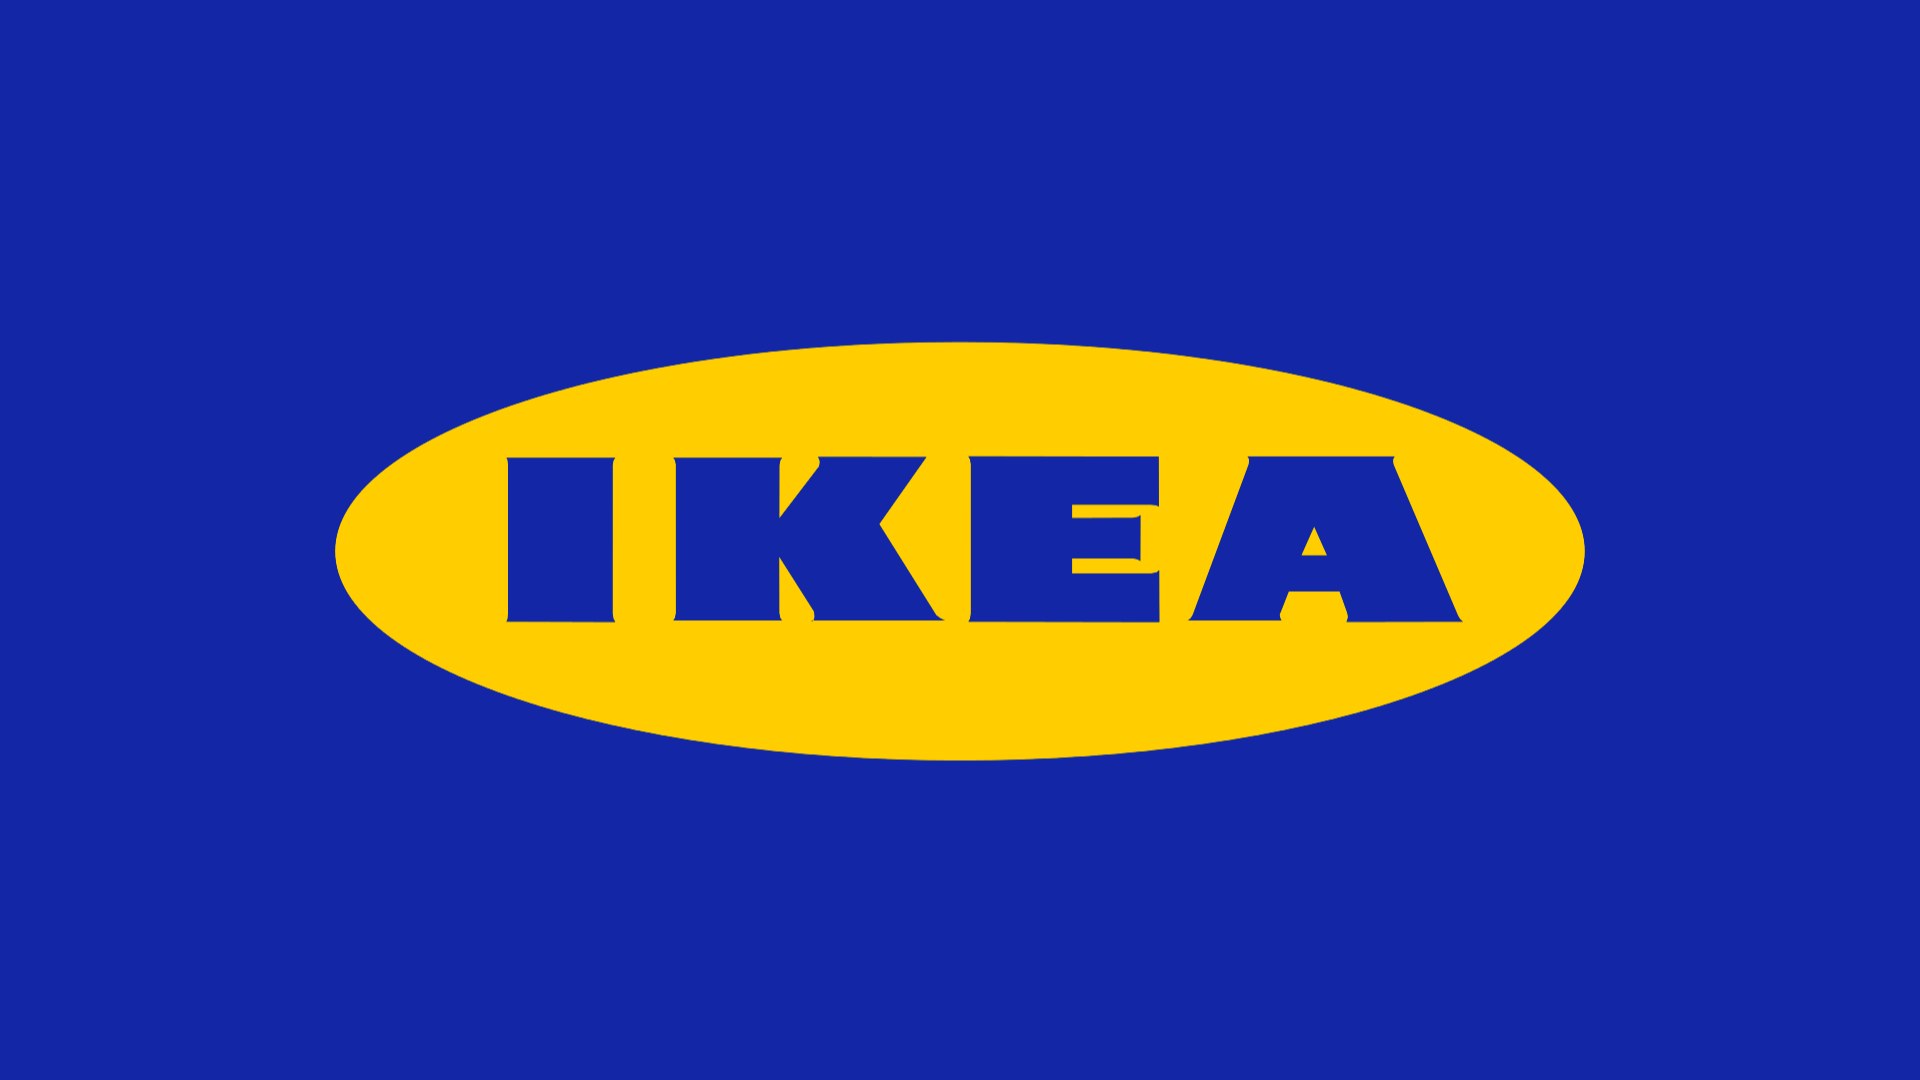 The IKEA logo isolated on a blue background